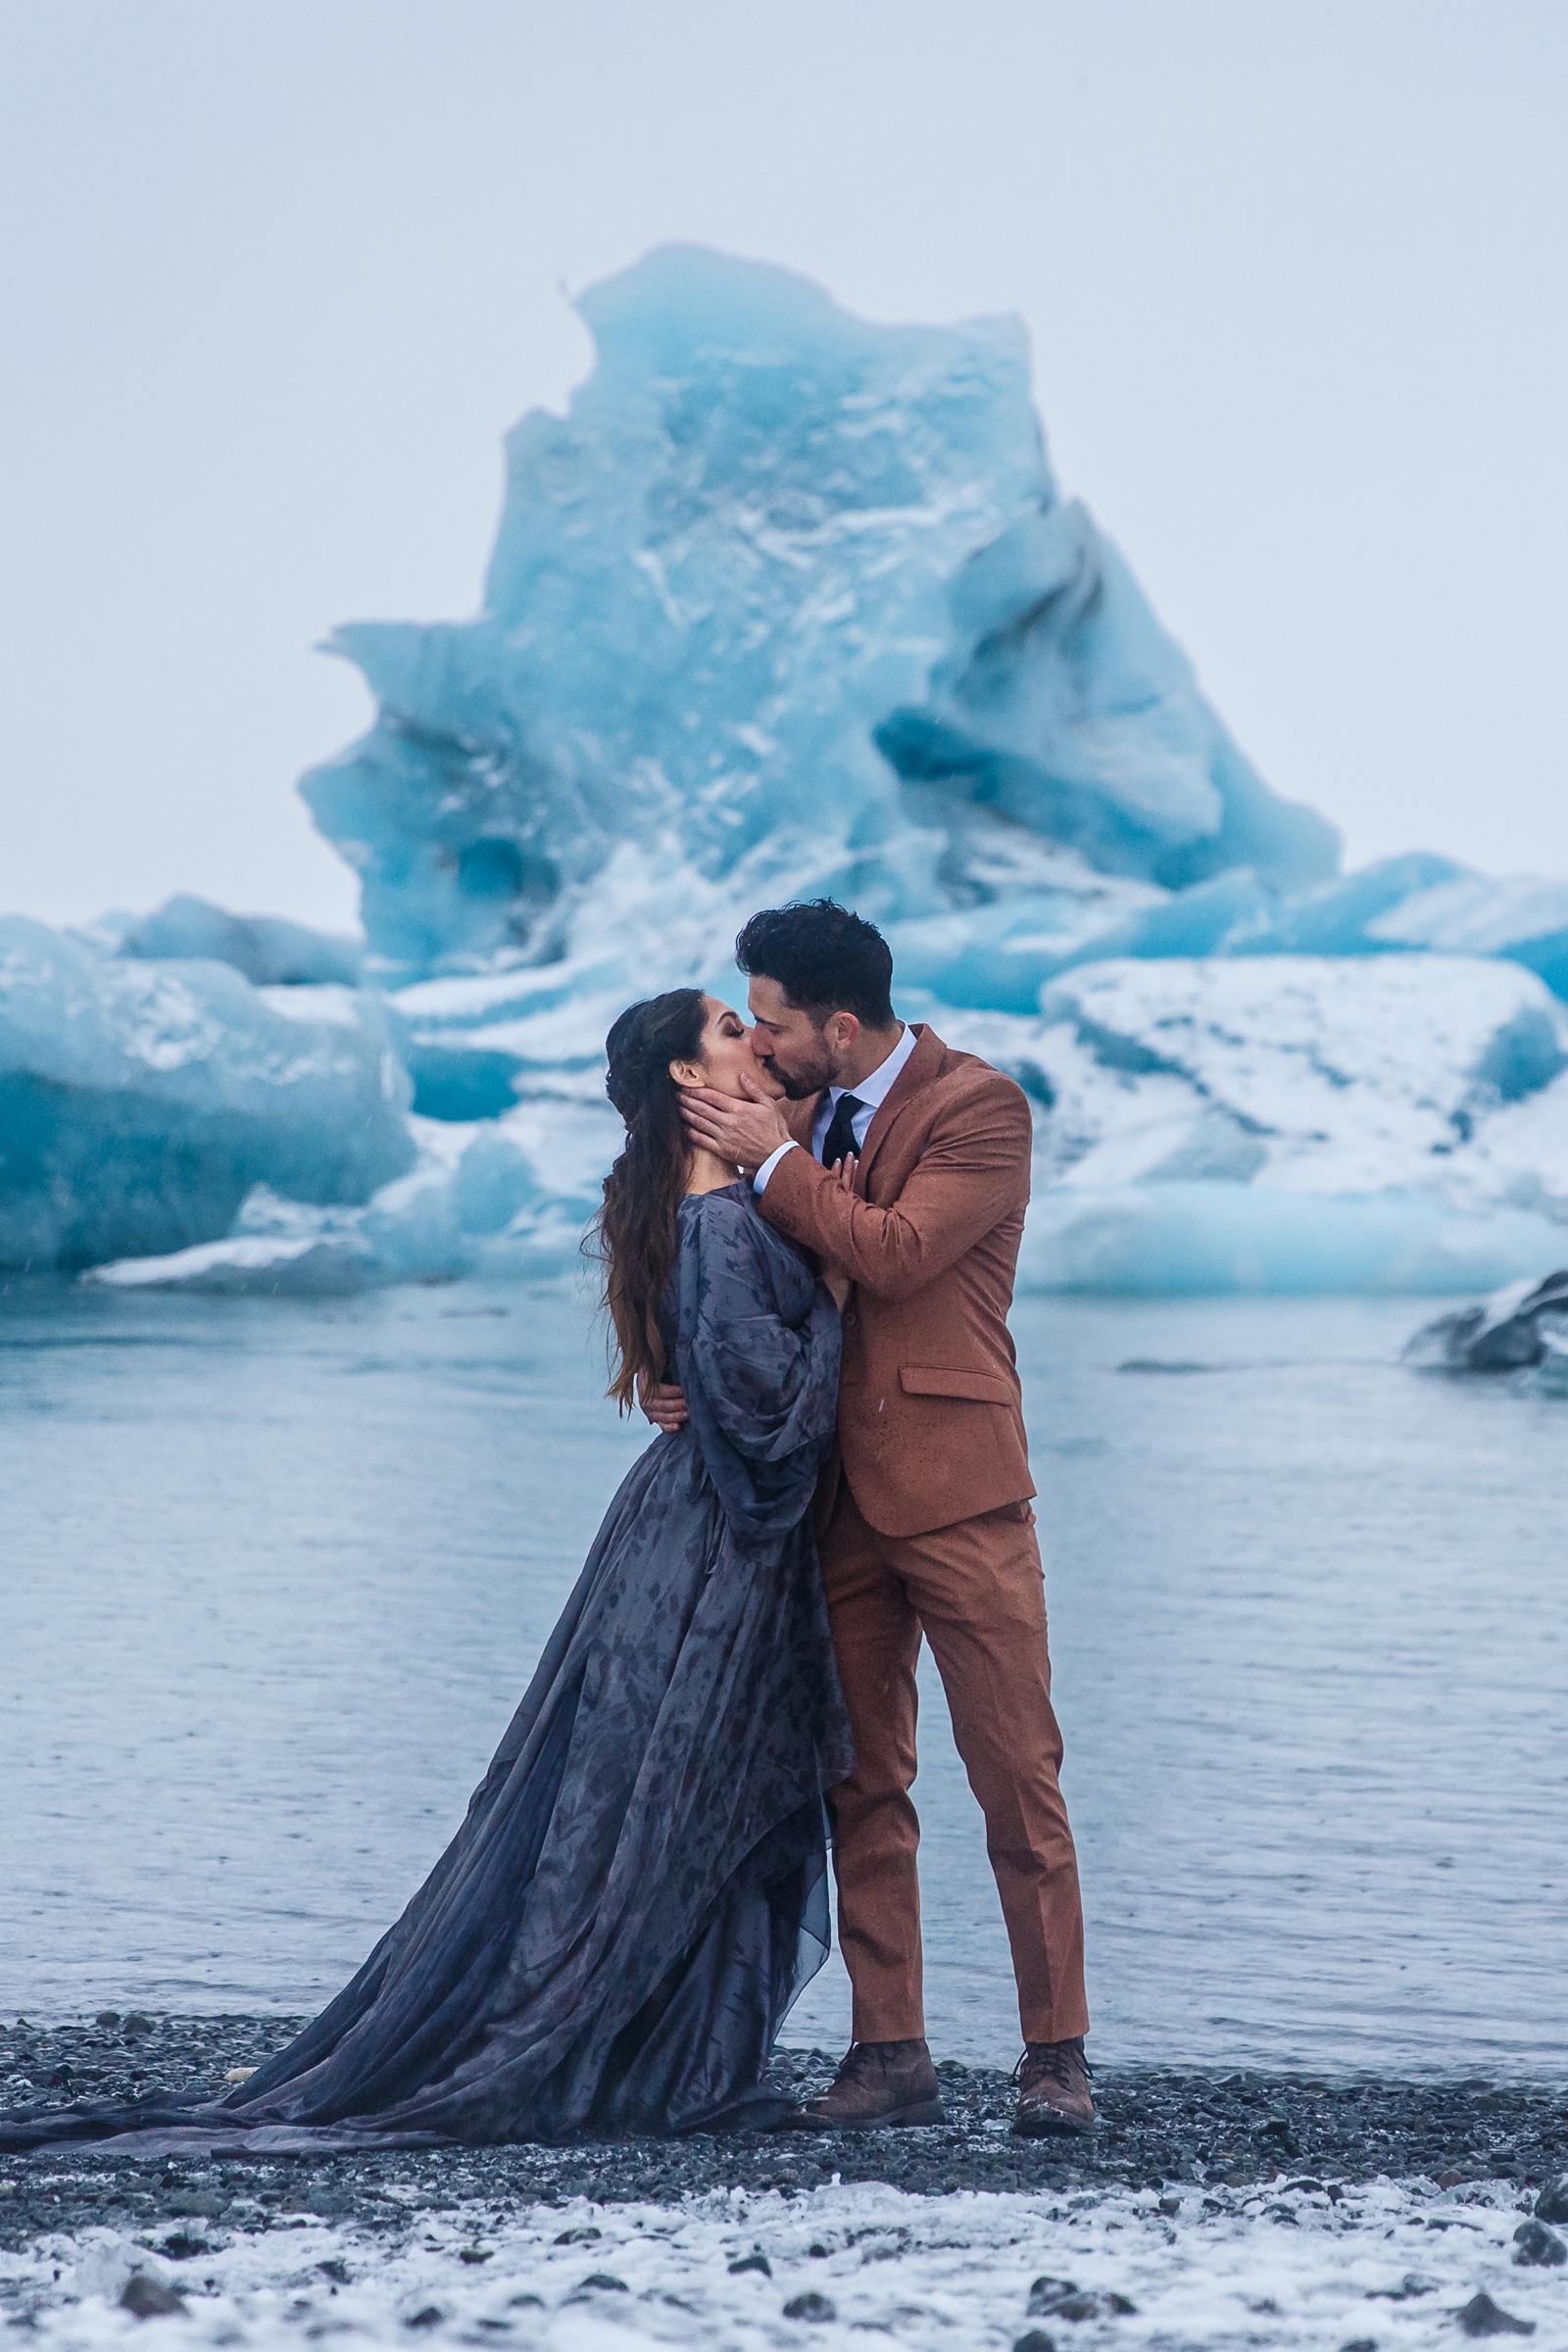 This couple eloped on the shores of Jökulsárlón Iceland.